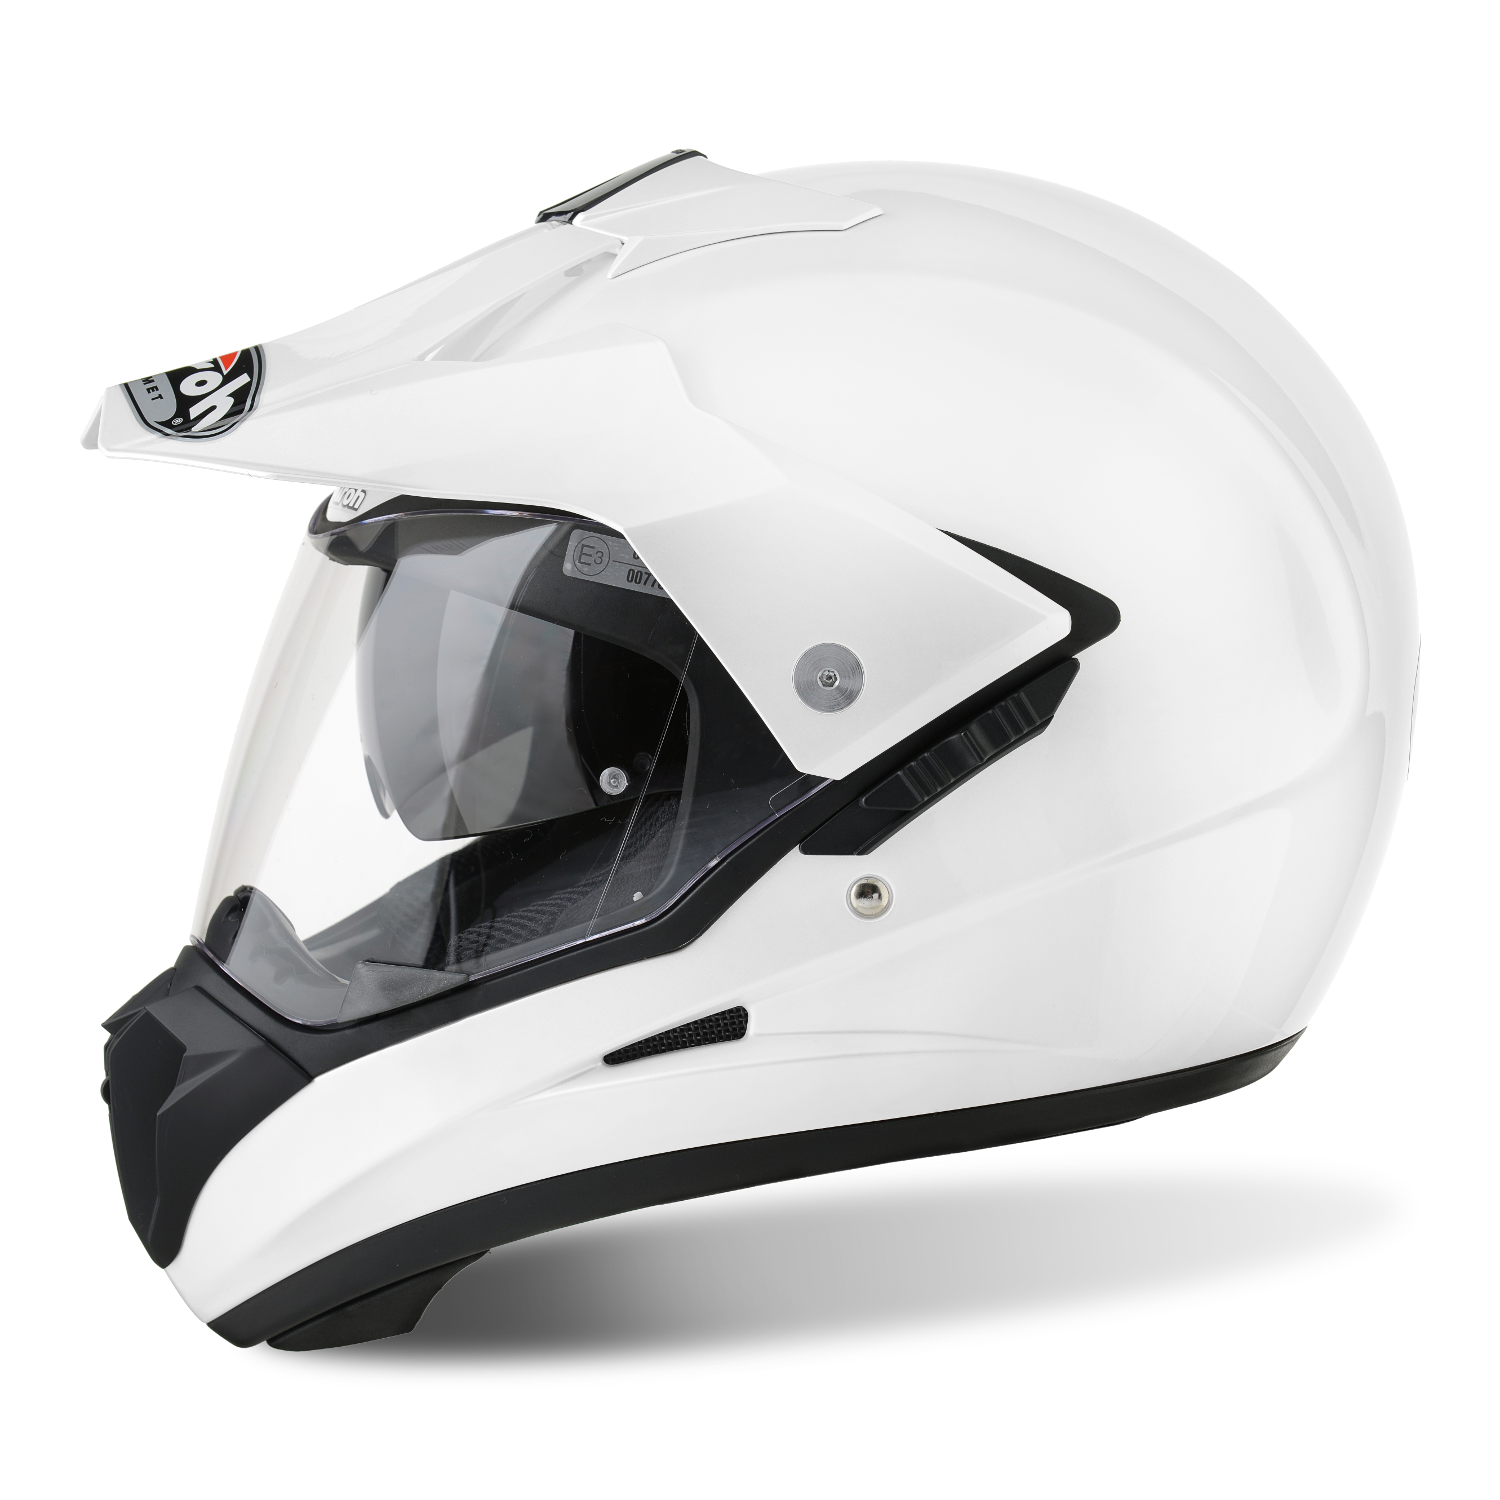 Airoh Helm S5 Color - White Gloss